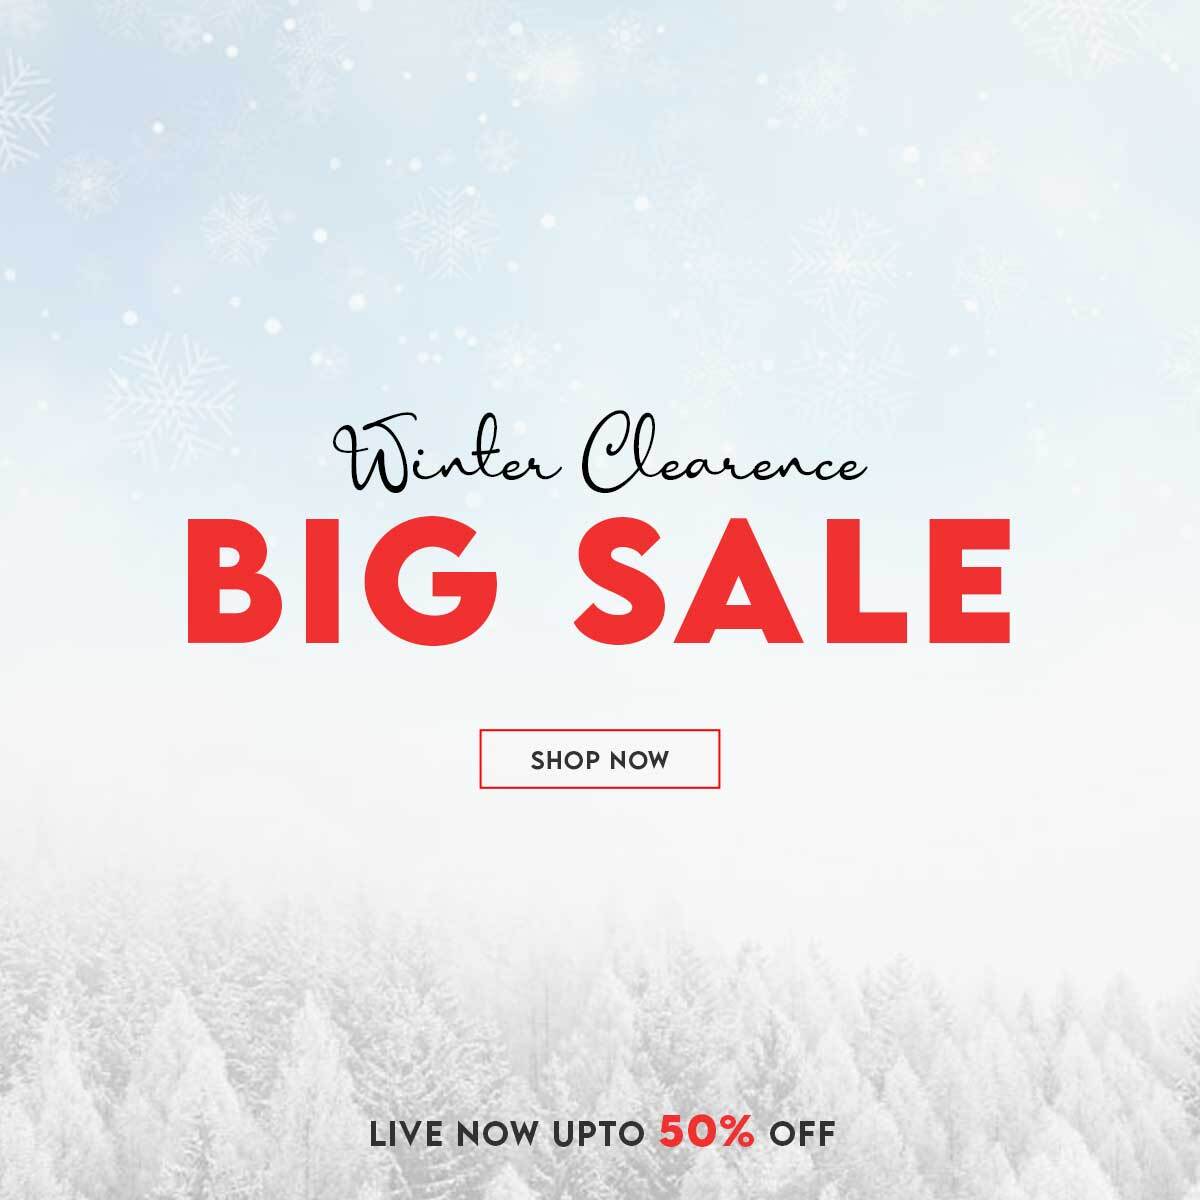 Bundle Up and Save Big: Winter Clearance Sale Now On!